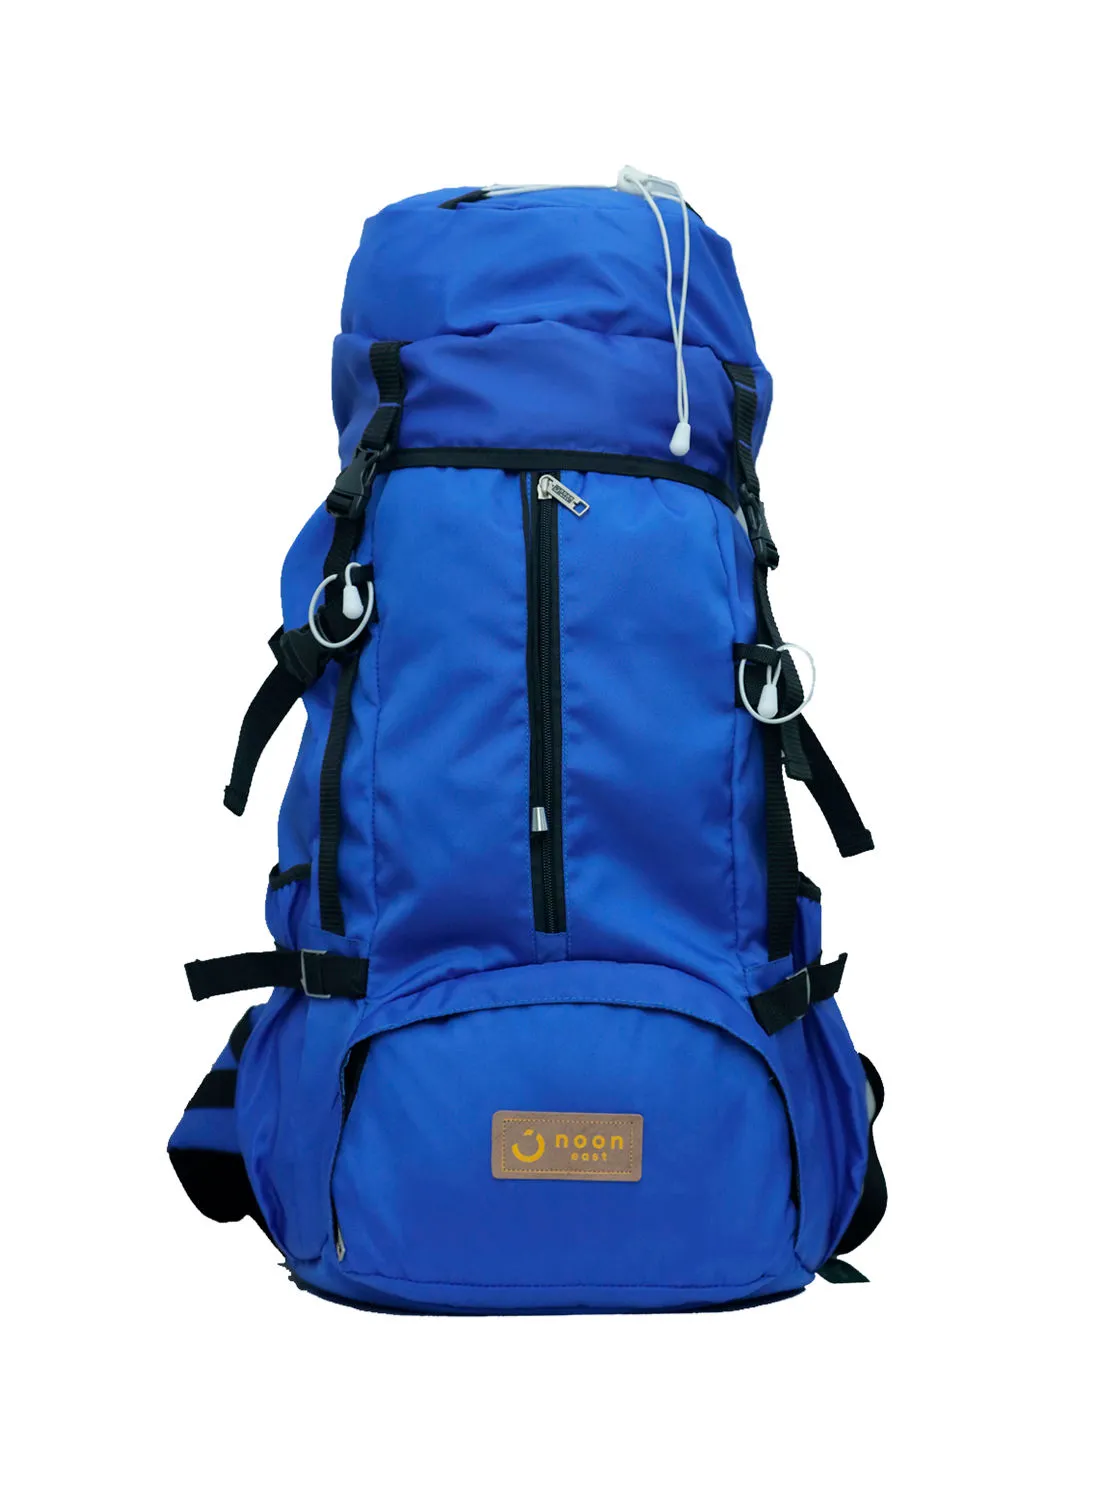 Noon East 45L Drawstring Water Resistant Multi Compartment Unisex Polyester Hiking/Trekking/Camping Backpack Compatible With 13 Inch Laptop RoyalBlue/Black